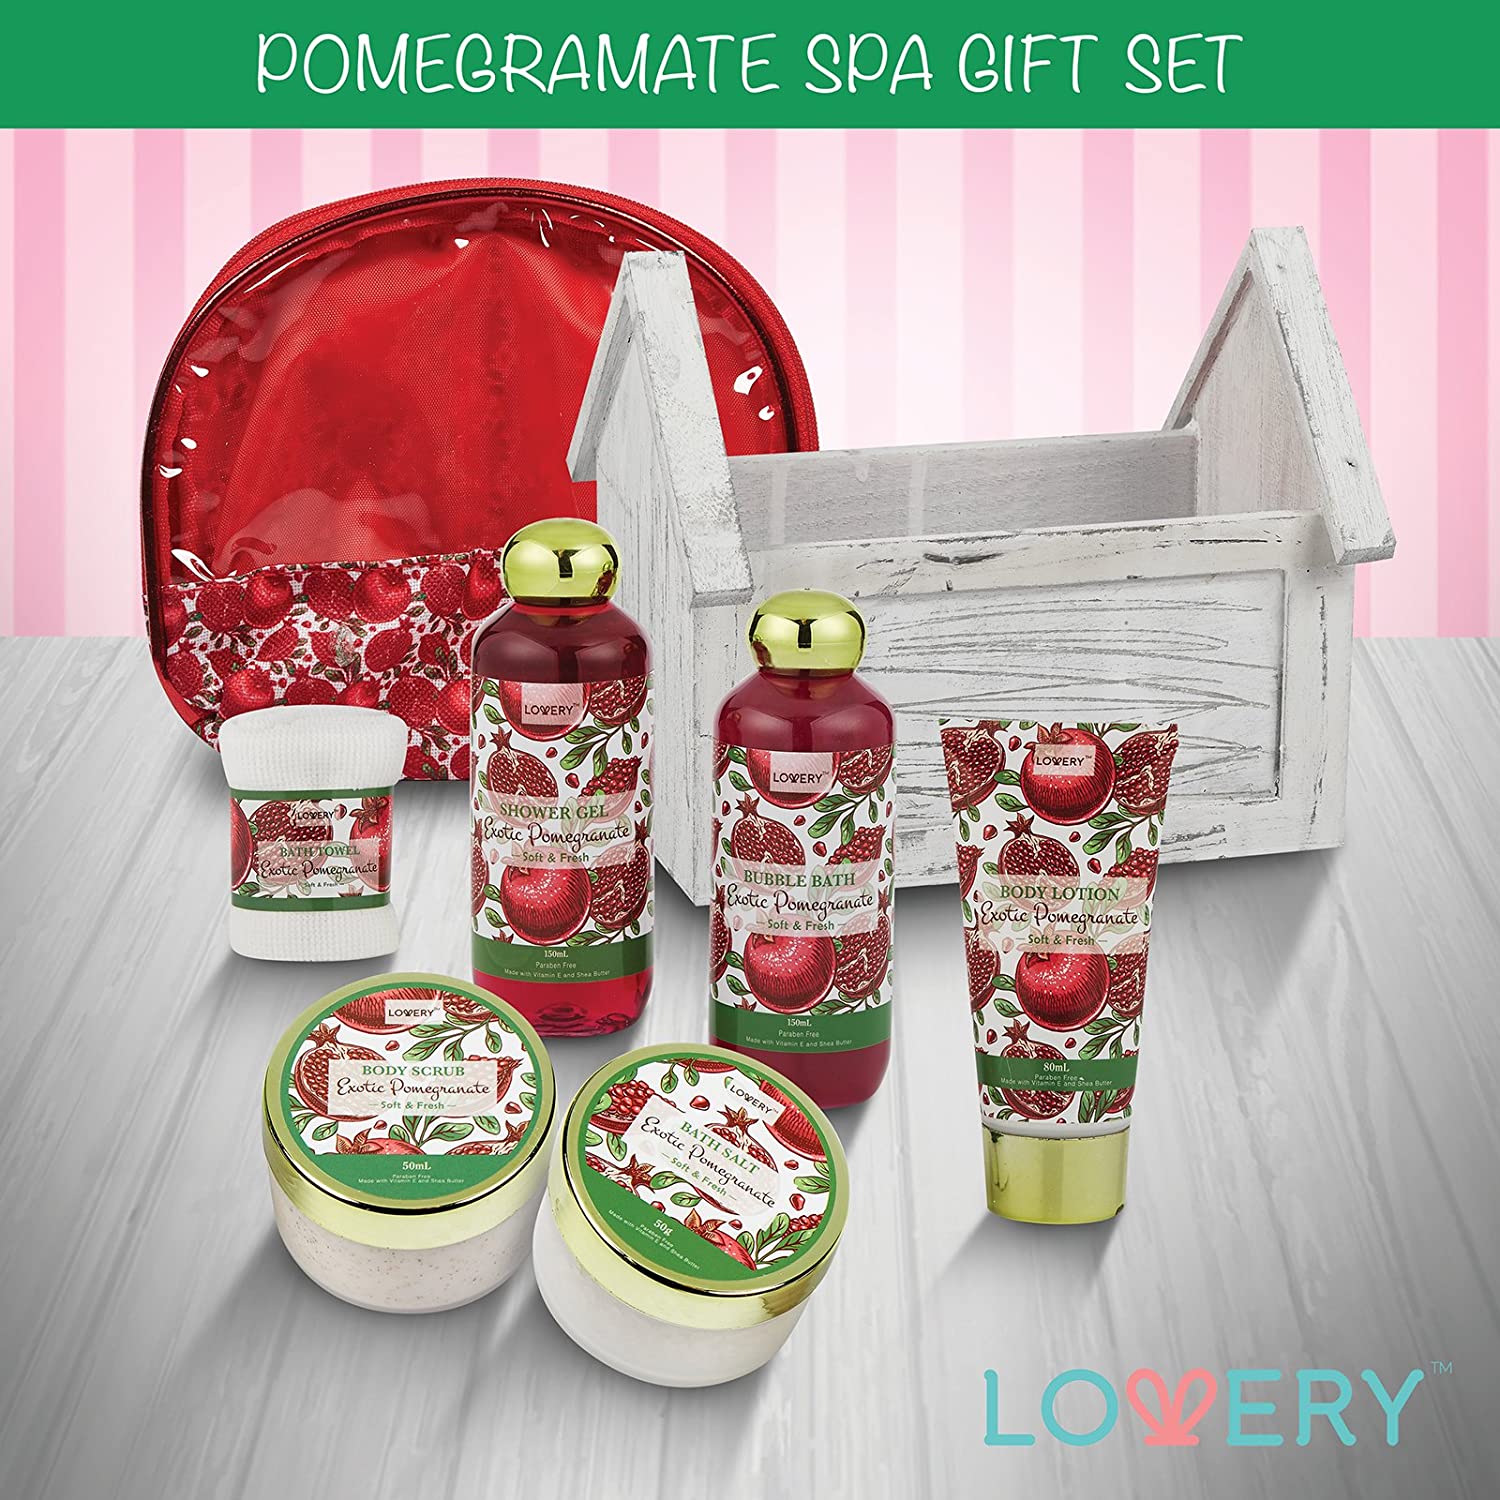 Lovery bath gift set, bath gift set, Exotic Pomegranate bath set, Spa gift, Fruity notes, Luxurious spa, Paraben-free, Pamper body, Sultry fragrance, Rejuvenate mind, Baby-soft skin, Bath accessories